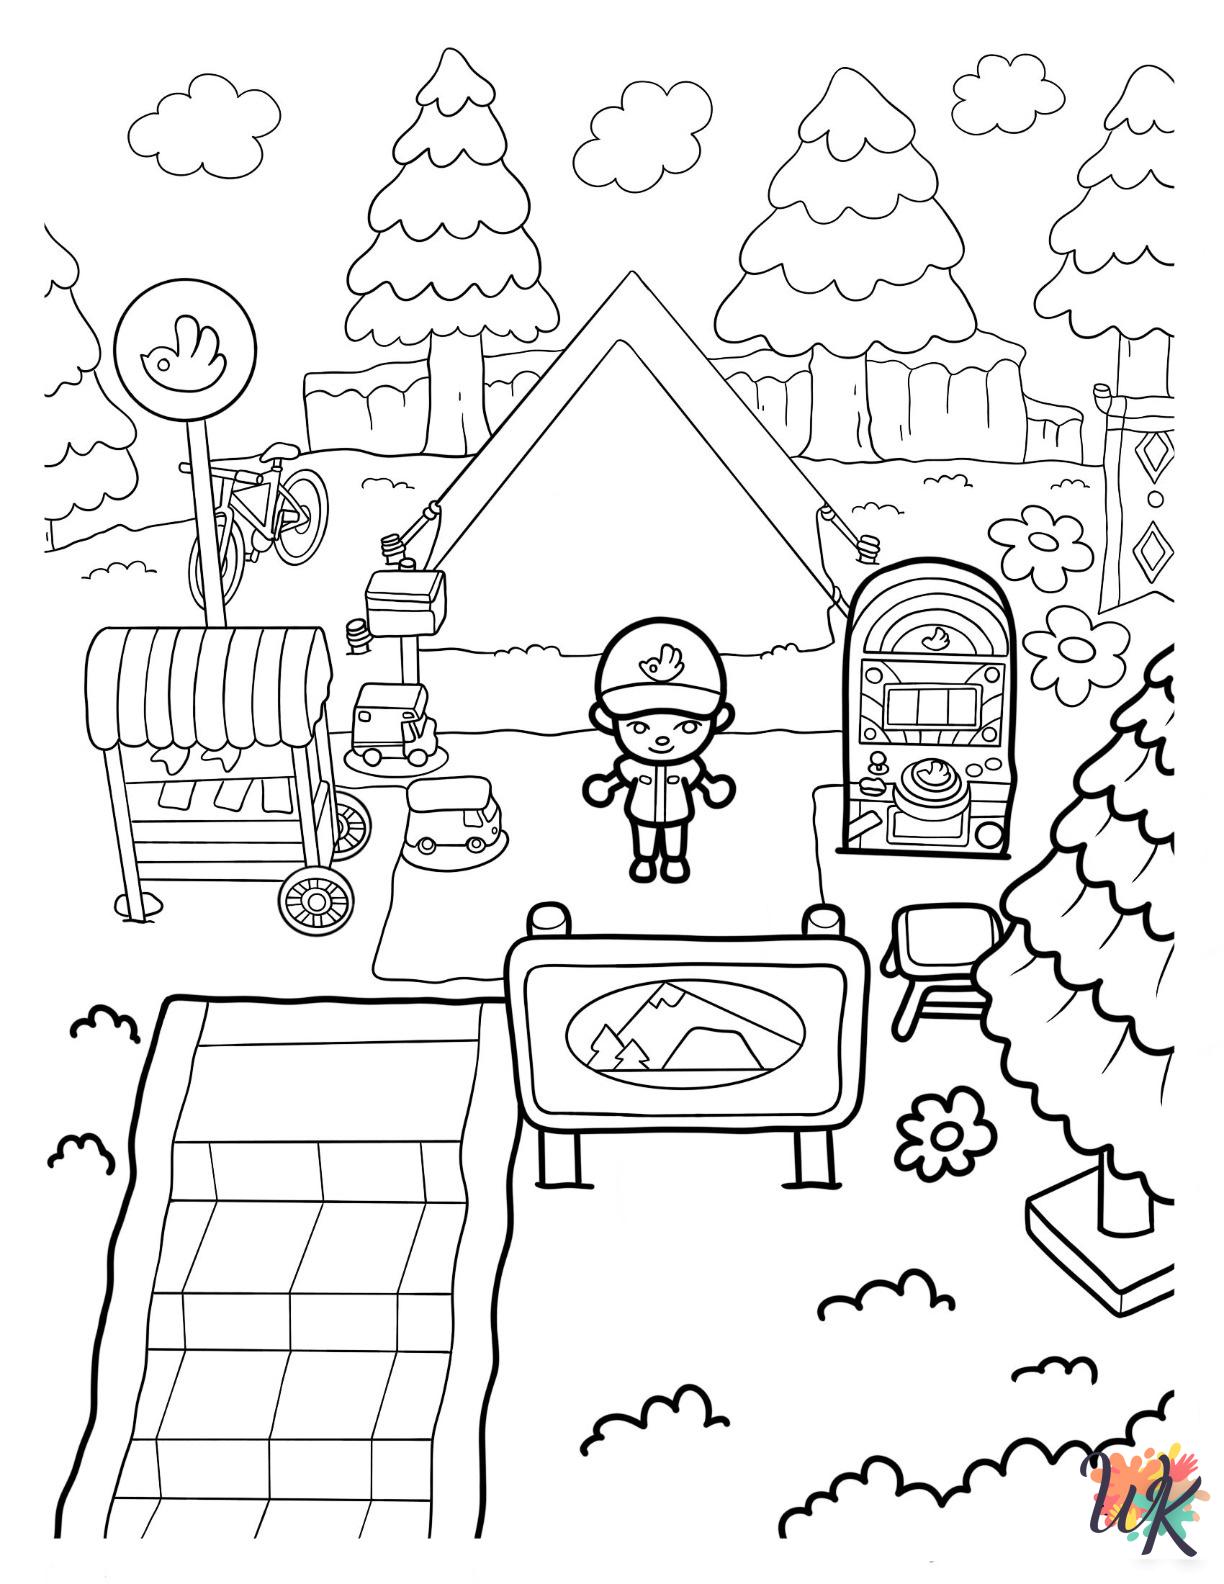 Animal Crossing printable coloring pages